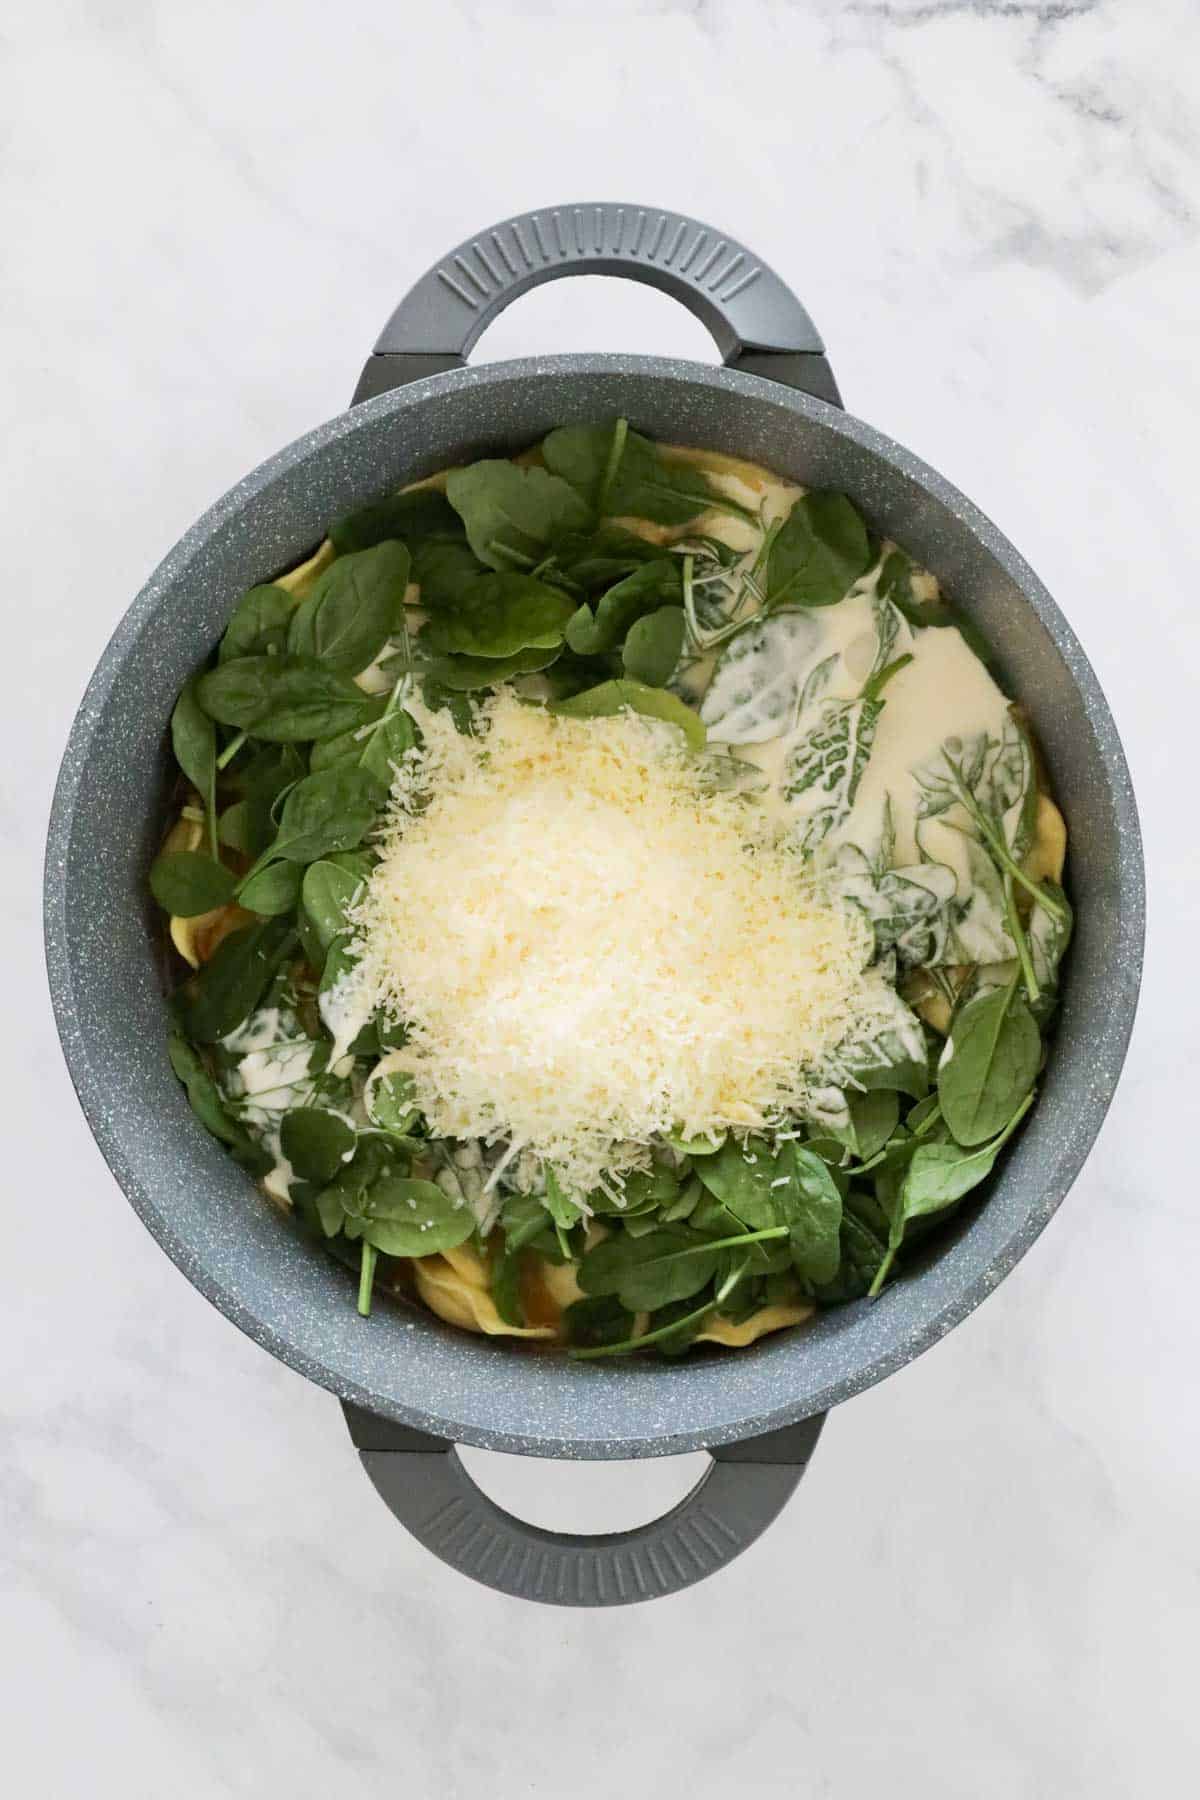 Baby spinach, cream and parmesan added to the pot.